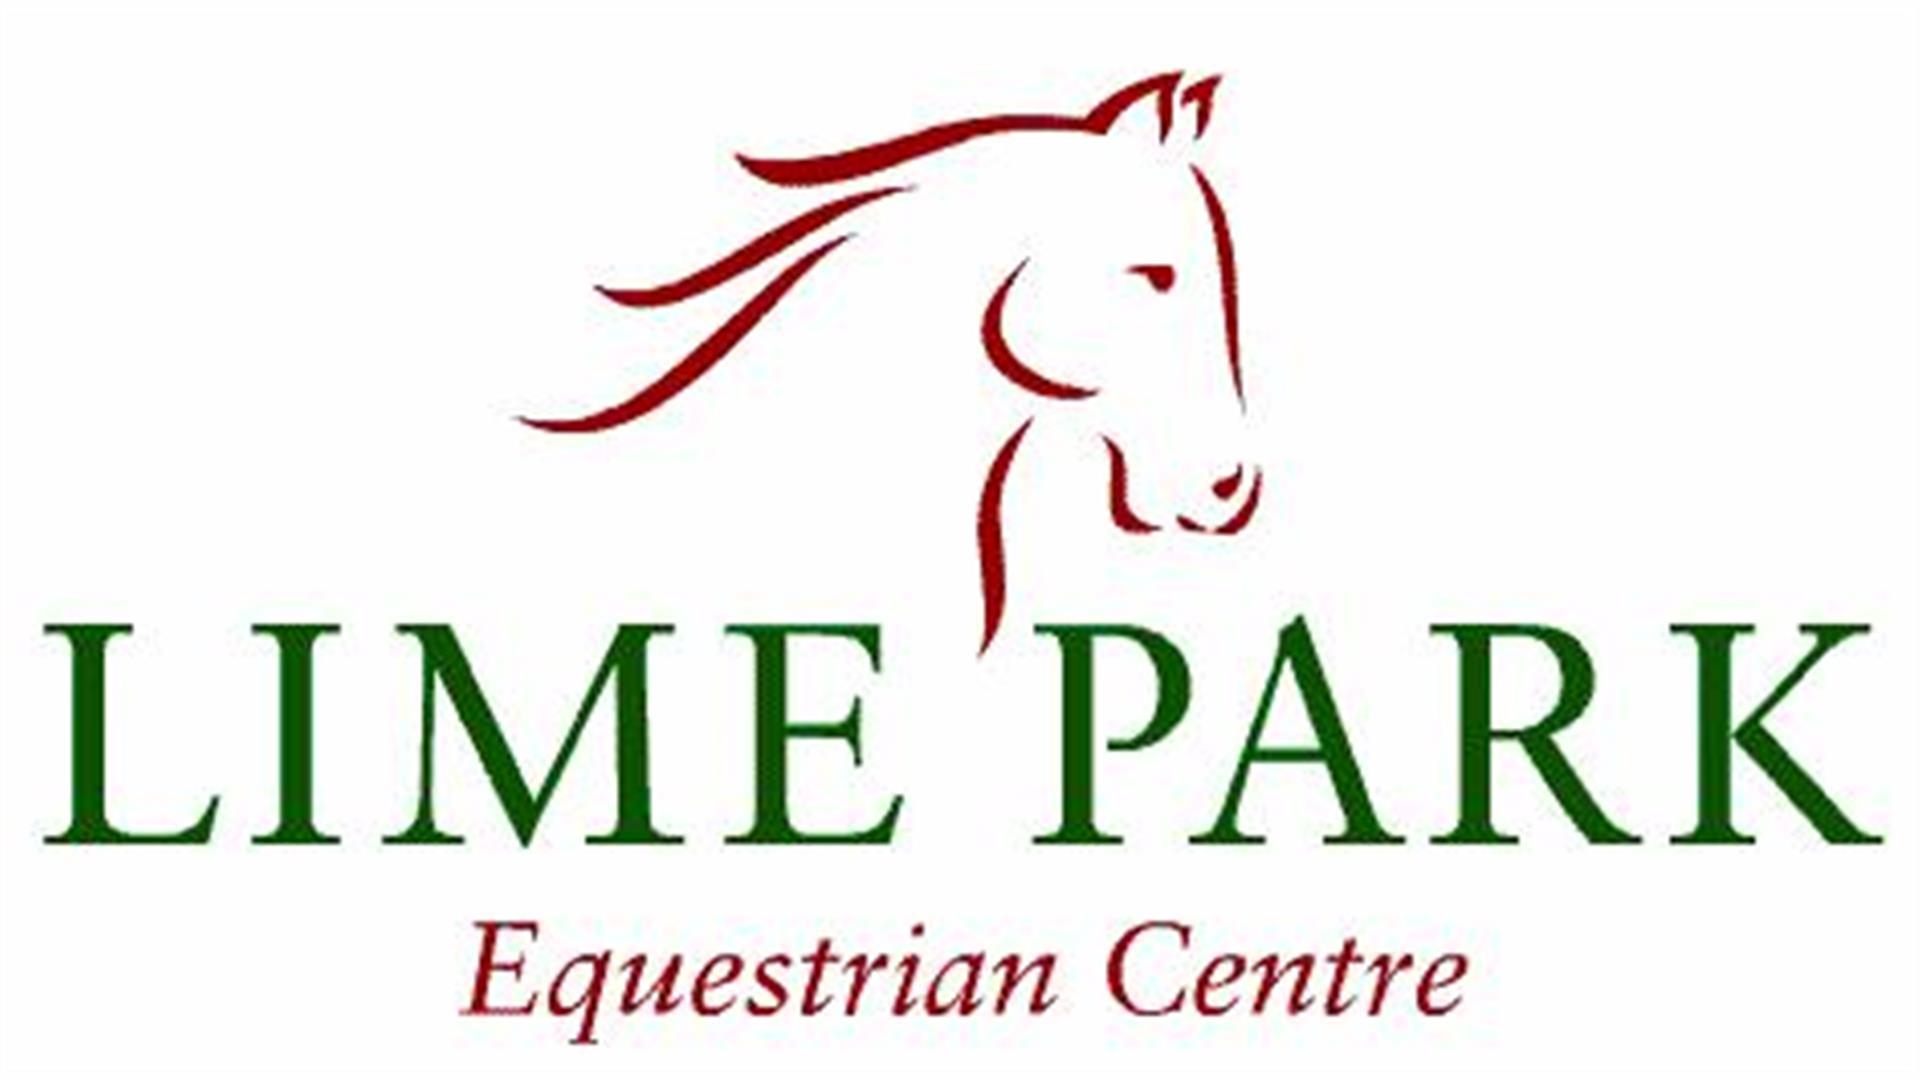 Image is of signage with outline of a horse